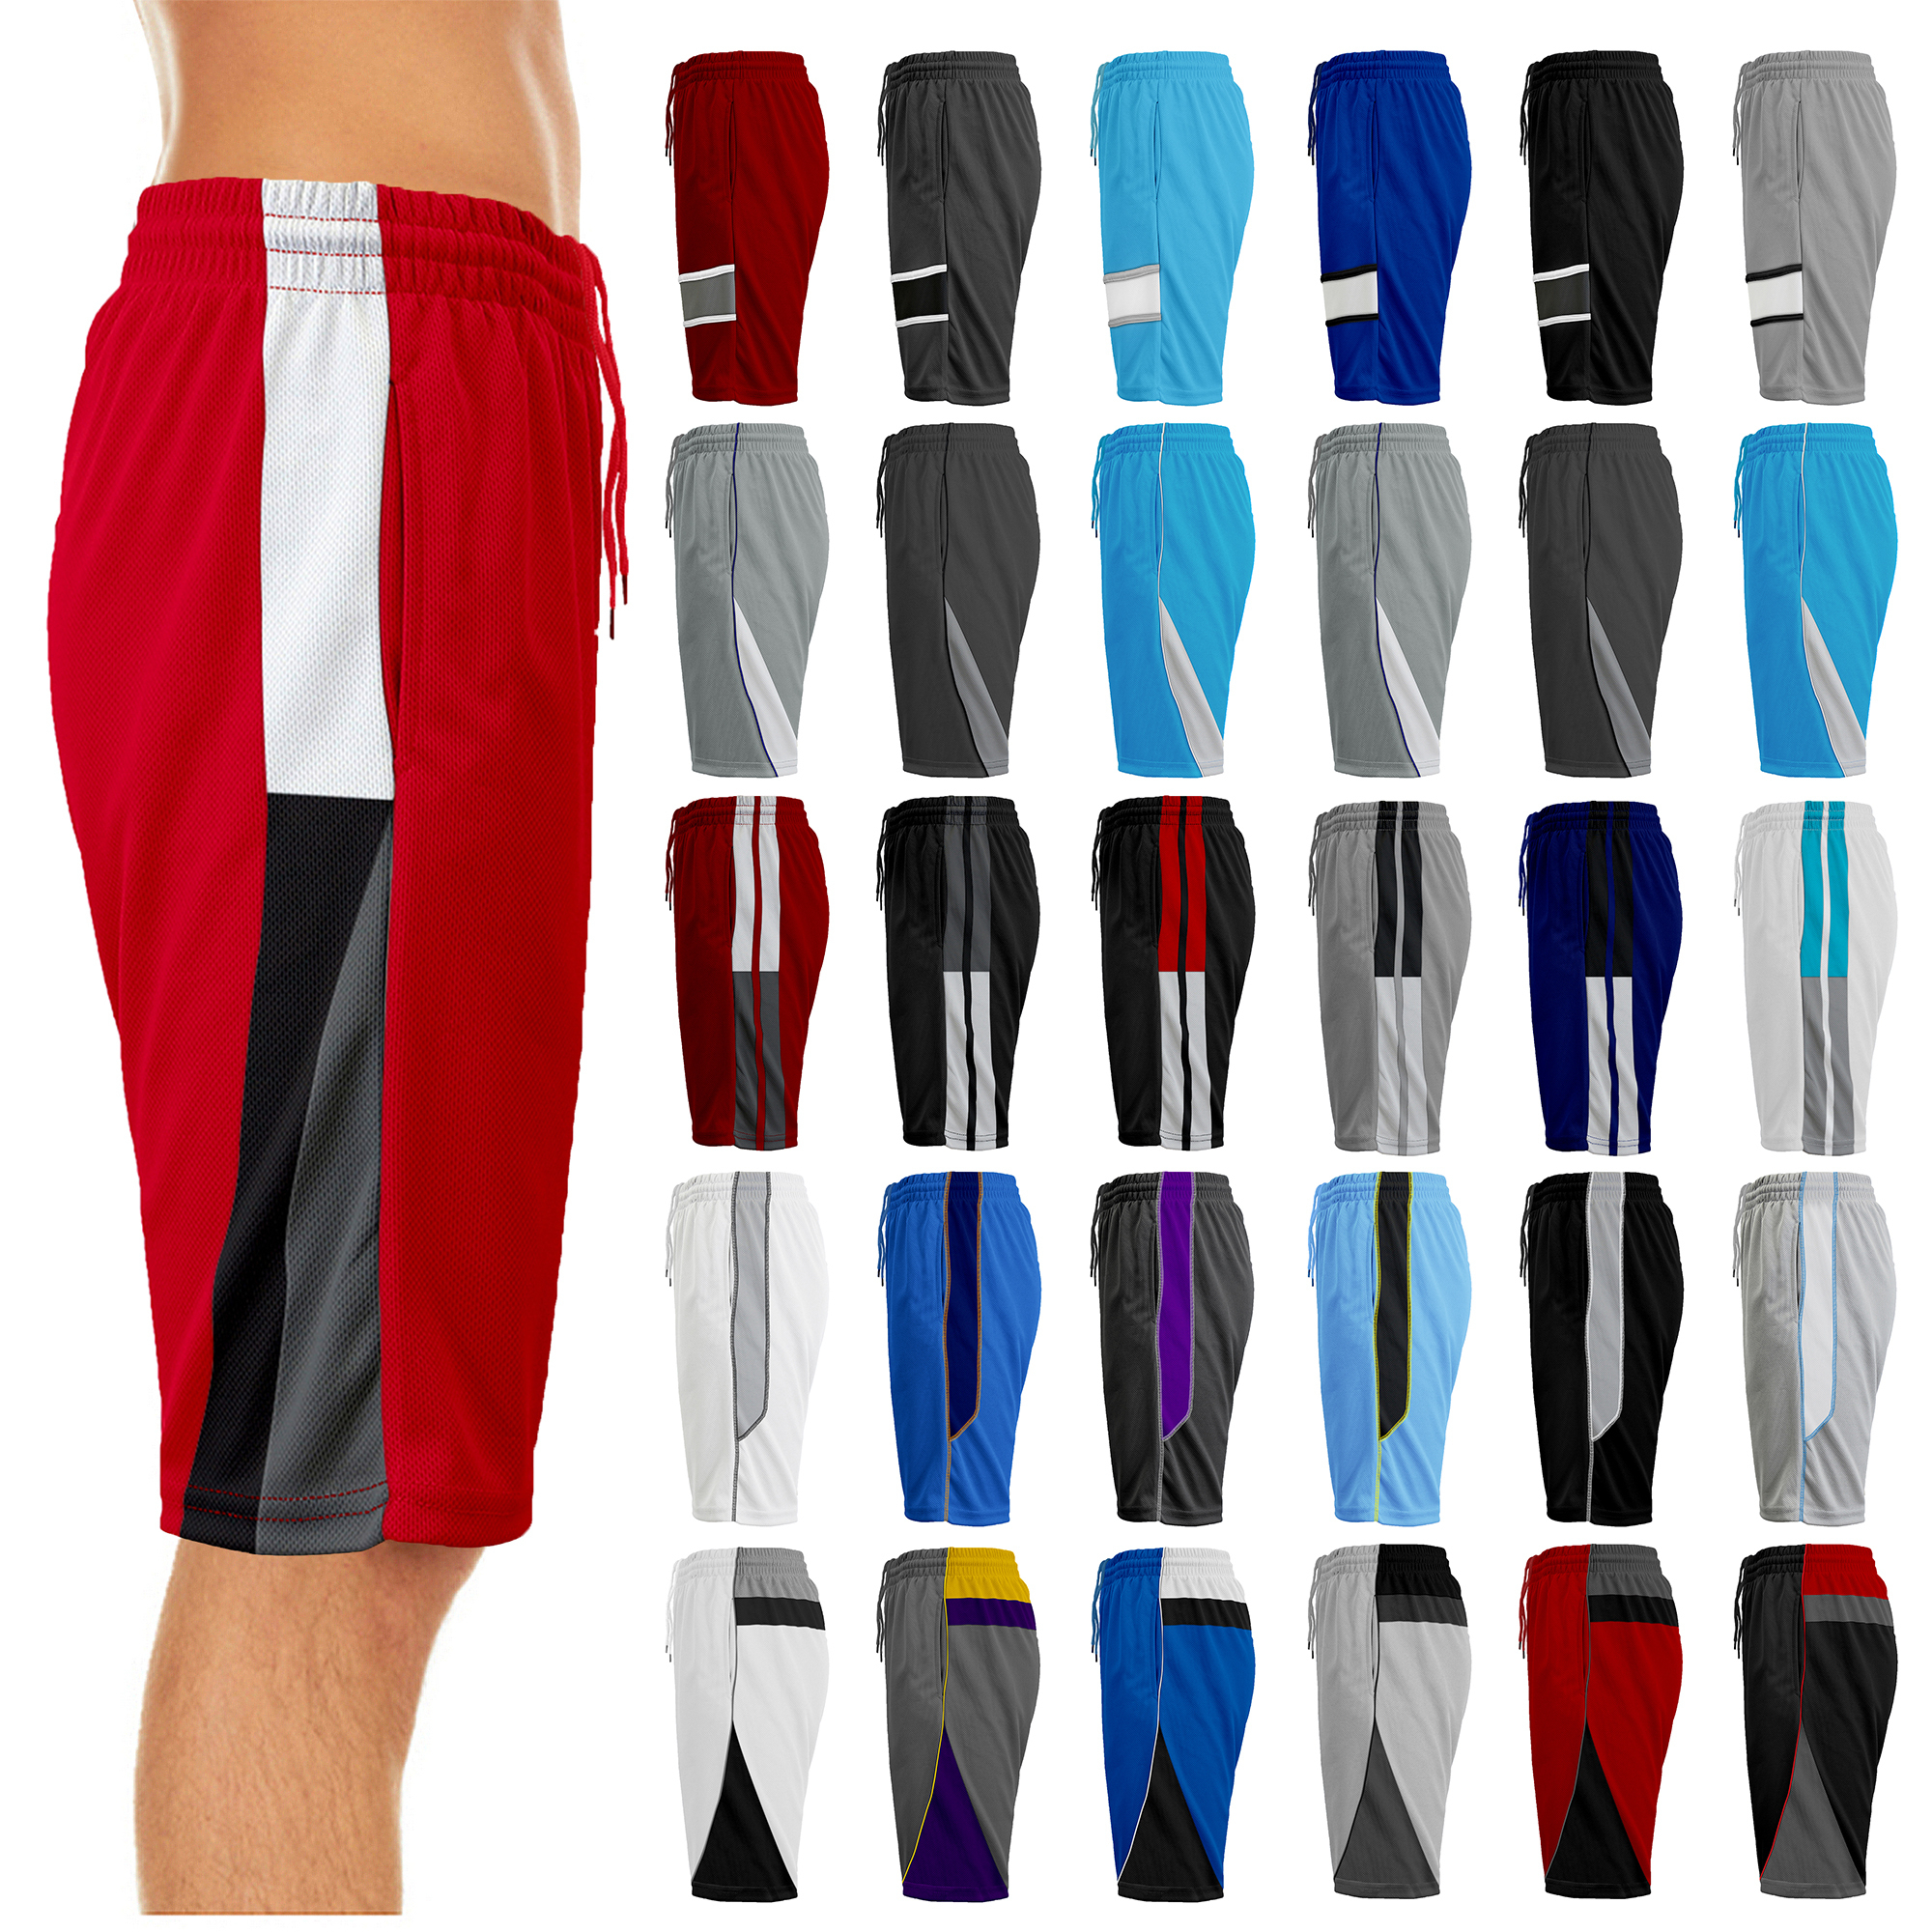 4-Pack: Men's Active Moisture-Wicking Mesh Performance Shorts (S-2XL) - Assorted Styles, Large